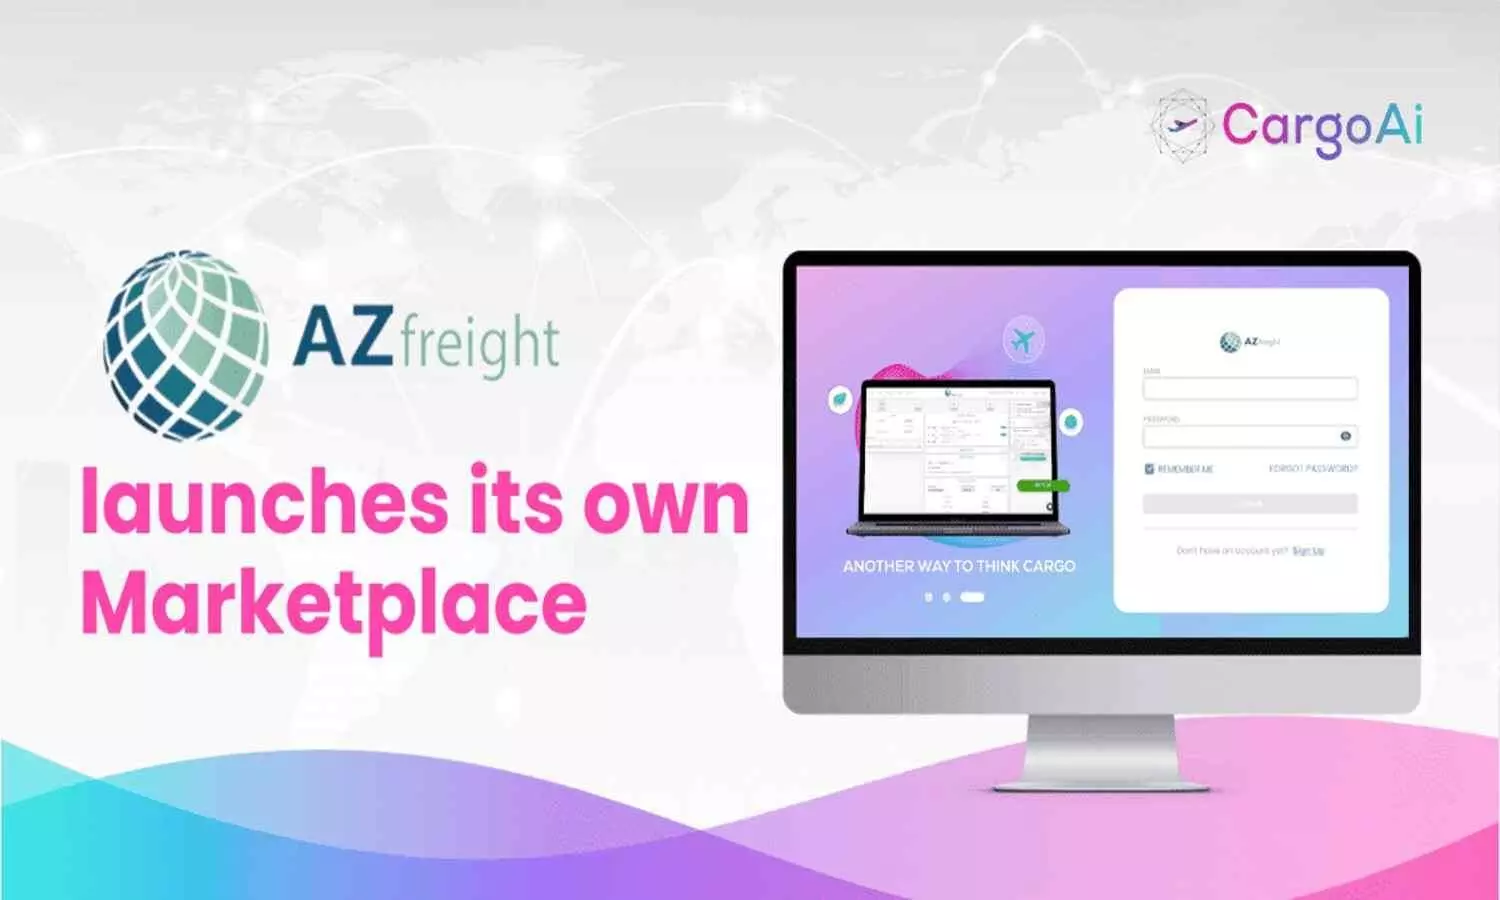 AZFreight partners with CargoAi; offers CargoWALLET to customers